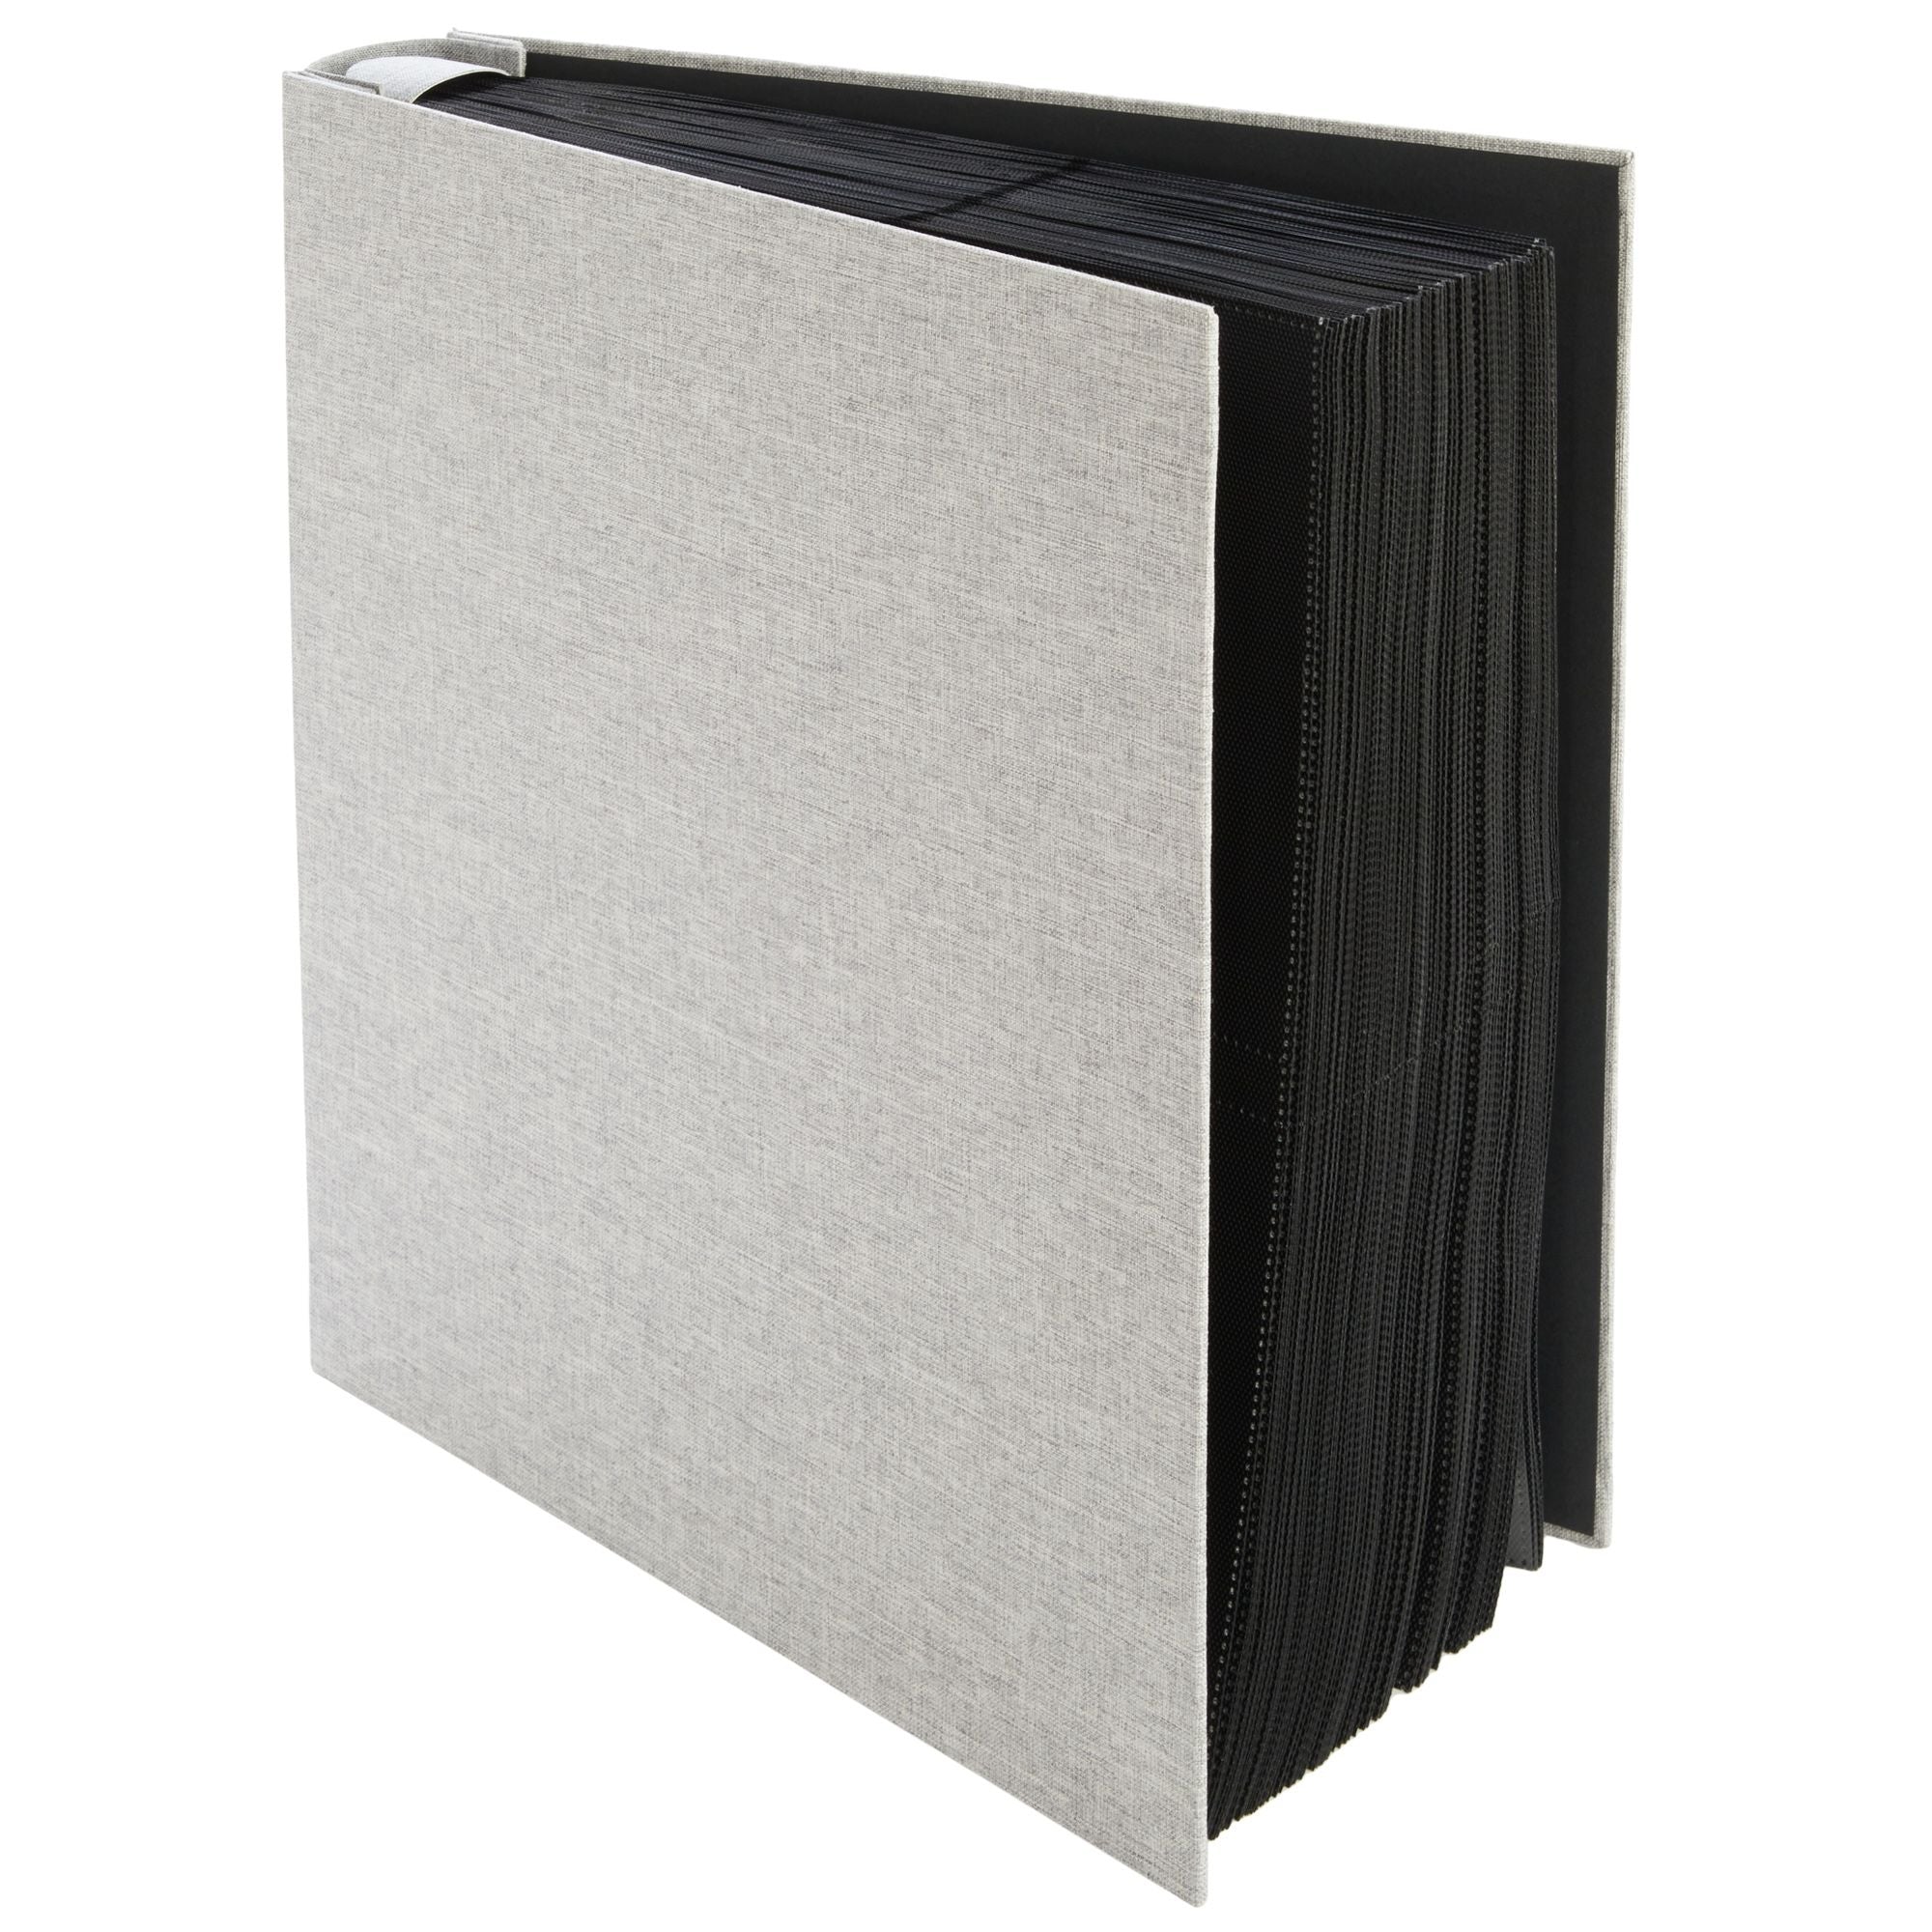 Pipilo Press large photo album for 1000 photos, 4x6 photo albums with  pockets, grey linen cover (